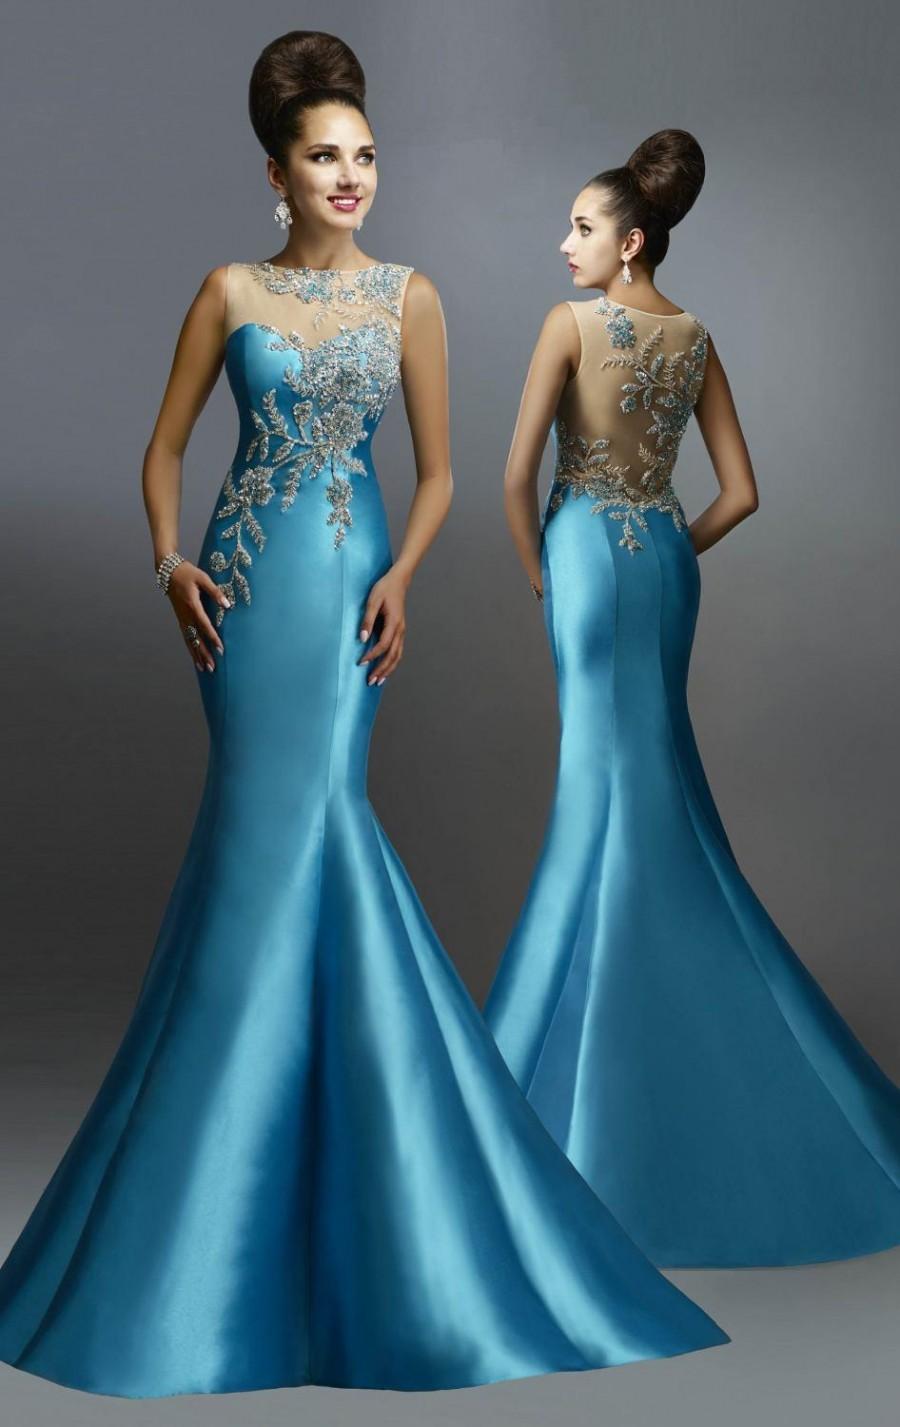 Wedding - New Arrival 2015 Mermaid Evening Dresses With Beads Crystal Sheer Sexy Backless Pageant Gowns Party Formal Dresses Designer By Janique Online with $116.92/Piece on Hjklp88's Store 